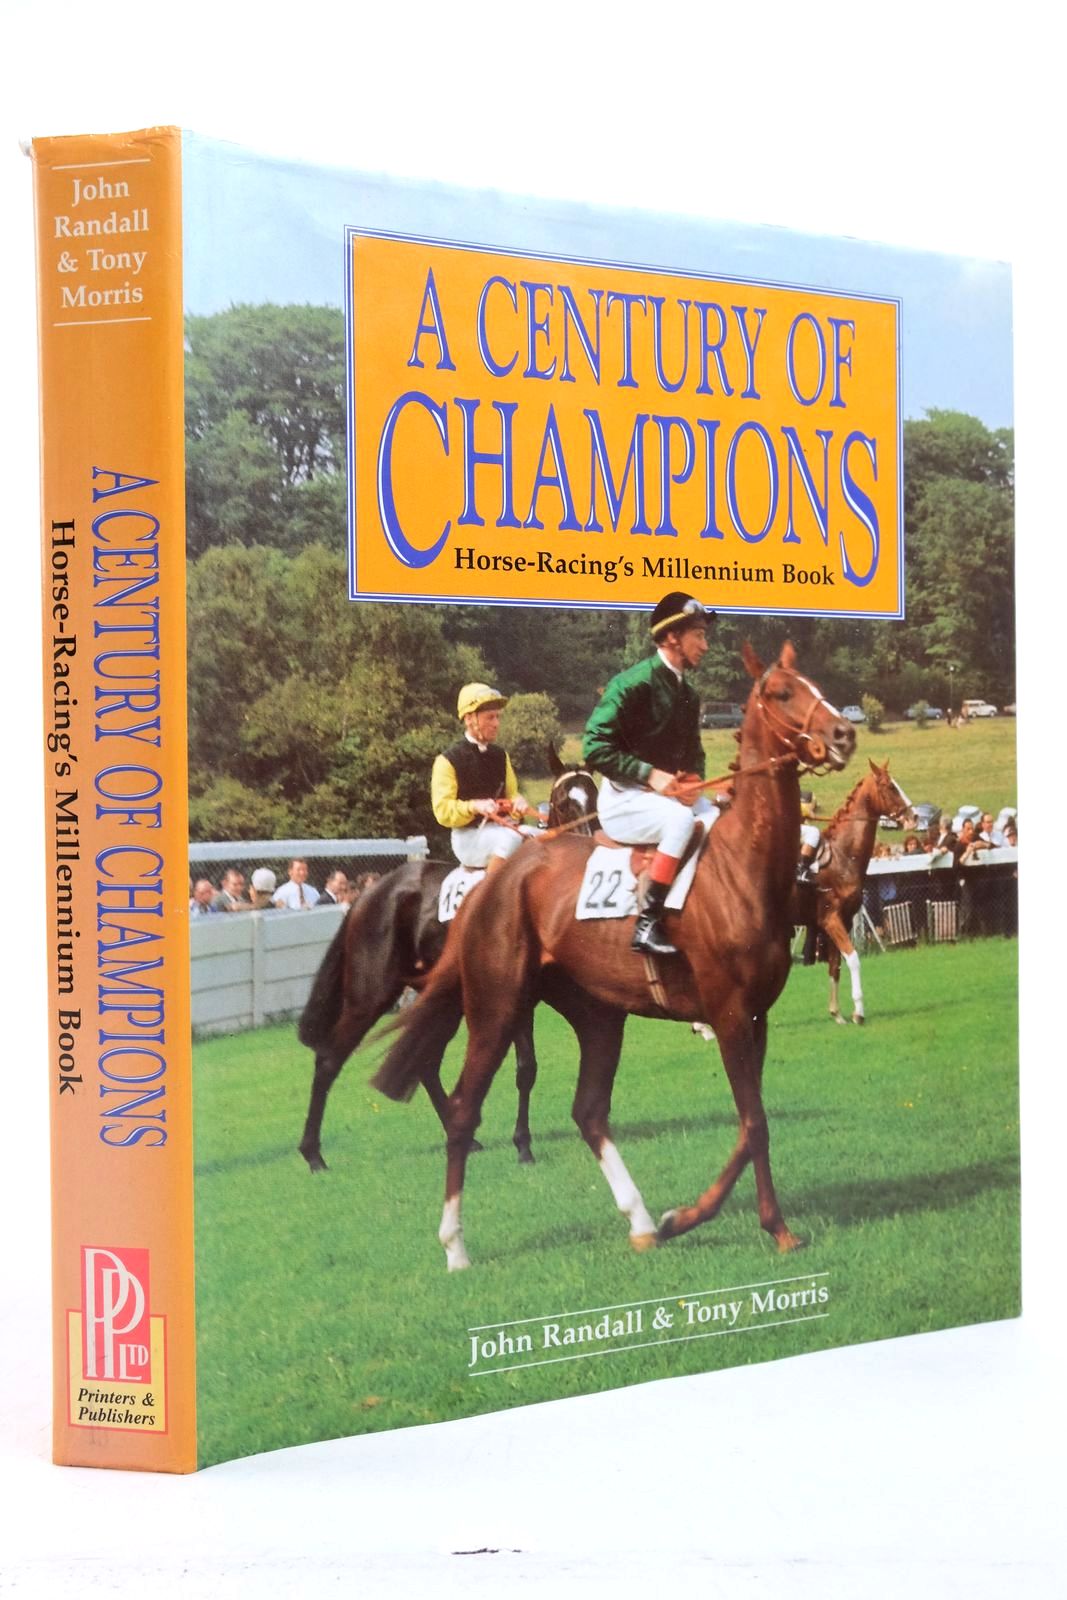 Photo of A CENTURY OF CHAMPIONS: HORSE-RACING'S MILLENNIUM BOOK written by Randall, John Morris, Tony published by Portway Press Limited (STOCK CODE: 2139520)  for sale by Stella & Rose's Books